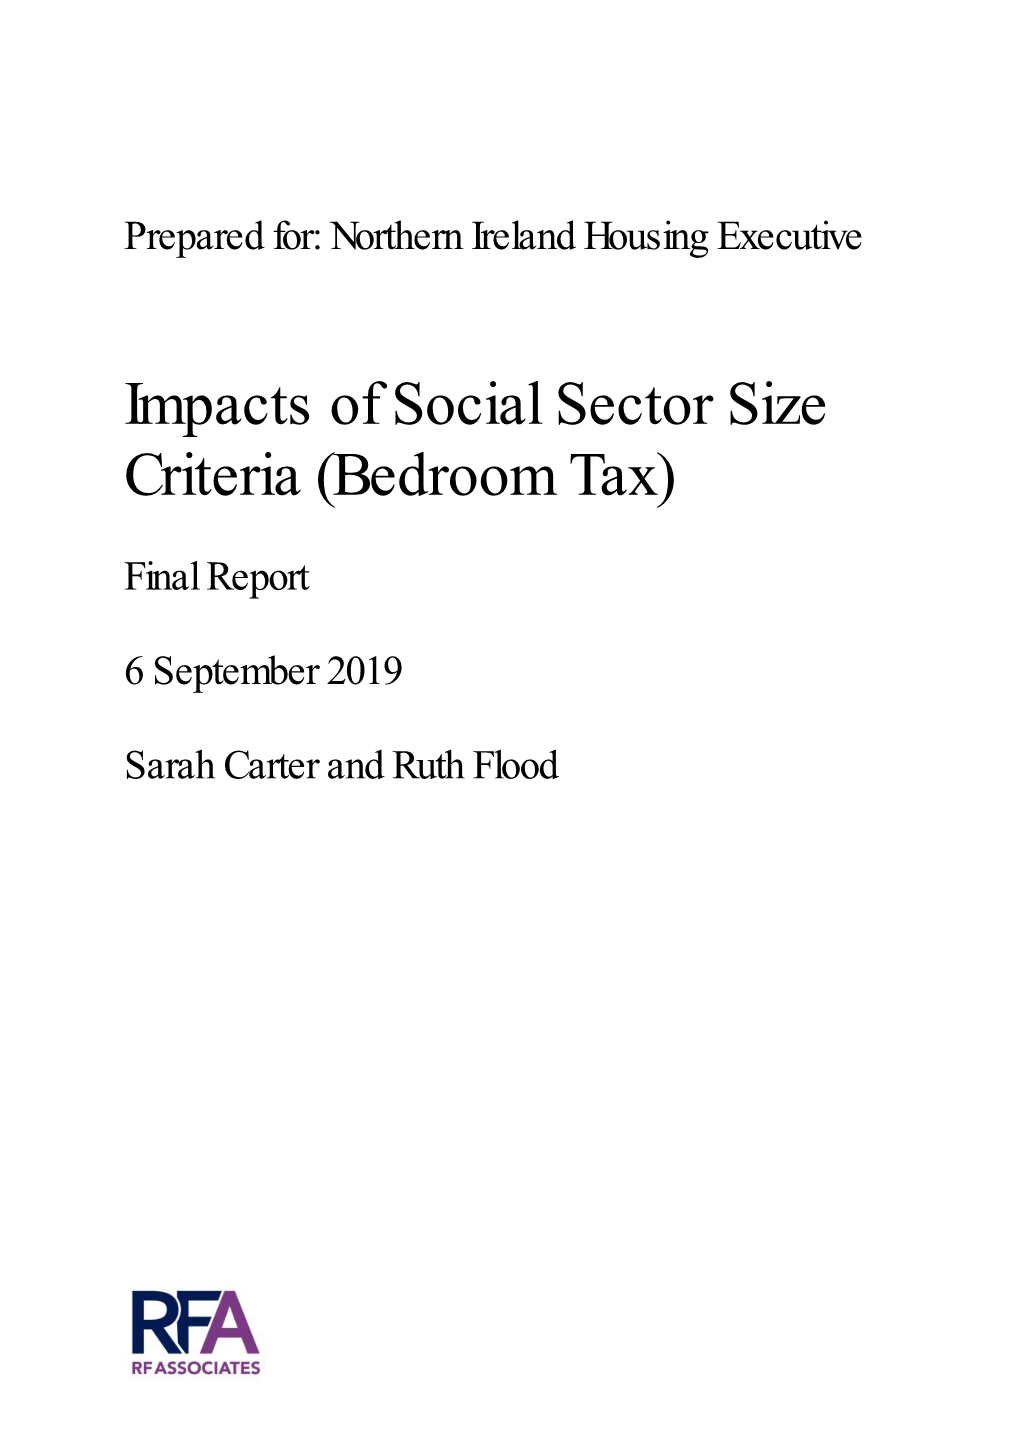 Impacts of Social Sector Size Criteria (Bedroom Tax)